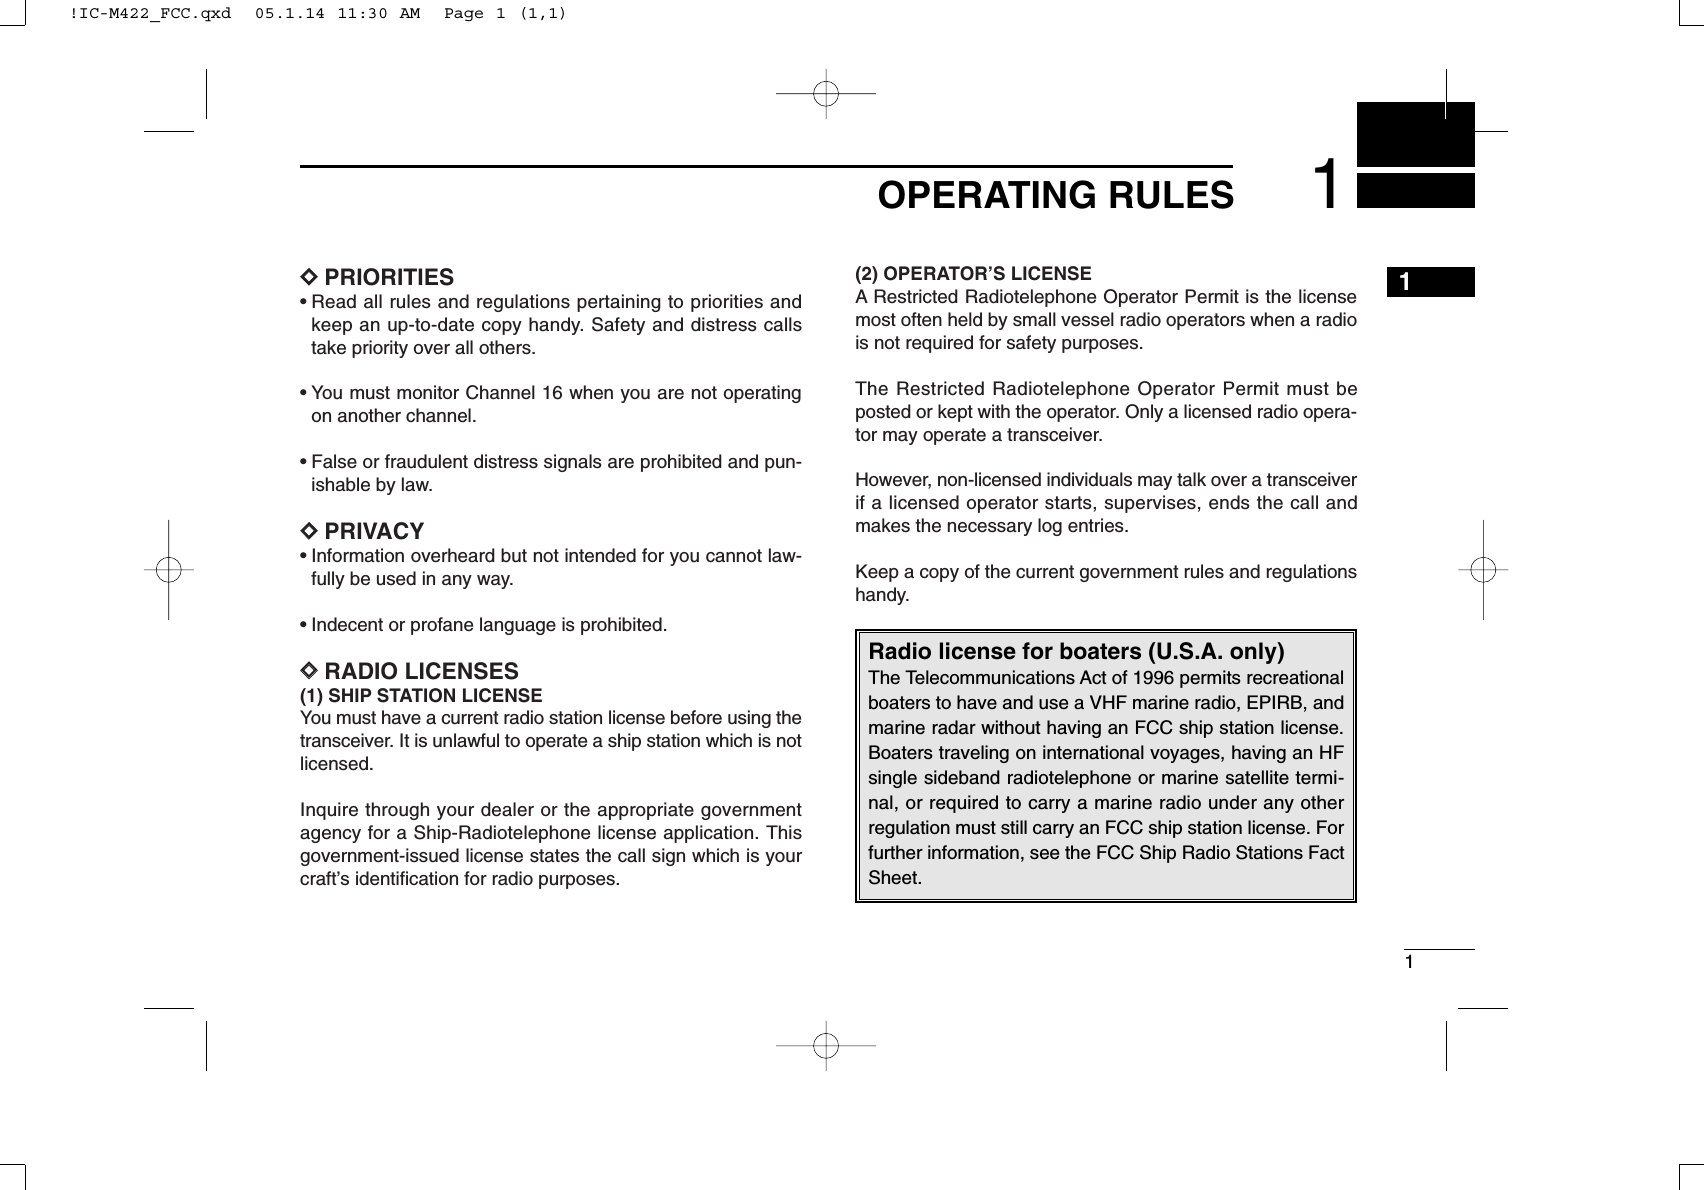 11OPERATING RULESDDPRIORITIES• Read all rules and regulations pertaining to priorities andkeep an up-to-date copy handy. Safety and distress callstake priority over all others.• You must monitor Channel 16 when you are not operatingon another channel.• False or fraudulent distress signals are prohibited and pun-ishable by law.DDPRIVACY• Information overheard but not intended for you cannot law-fully be used in any way.• Indecent or profane language is prohibited.DDRADIO LICENSES(1) SHIP STATION LICENSEYou must have a current radio station license before using thetransceiver. It is unlawful to operate a ship station which is notlicensed.Inquire through your dealer or the appropriate governmentagency for a Ship-Radiotelephone license application. Thisgovernment-issued license states the call sign which is yourcraft’s identiﬁcation for radio purposes.(2) OPERATOR’S LICENSEA Restricted Radiotelephone Operator Permit is the licensemost often held by small vessel radio operators when a radiois not required for safety purposes.The Restricted Radiotelephone Operator Permit must beposted or kept with the operator. Only a licensed radio opera-tor may operate a transceiver.However, non-licensed individuals may talk over a transceiverif a licensed operator starts, supervises, ends the call andmakes the necessary log entries.Keep a copy of the current government rules and regulationshandy.Radio license for boaters (U.S.A. only)The Telecommunications Act of 1996 permits recreationalboaters to have and use a VHF marine radio, EPIRB, andmarine radar without having an FCC ship station license.Boaters traveling on international voyages, having an HFsingle sideband radiotelephone or marine satellite termi-nal, or required to carry a marine radio under any otherregulation must still carry an FCC ship station license. Forfurther information, see the FCC Ship Radio Stations FactSheet.1!IC-M422_FCC.qxd  05.1.14 11:30 AM  Page 1 (1,1)